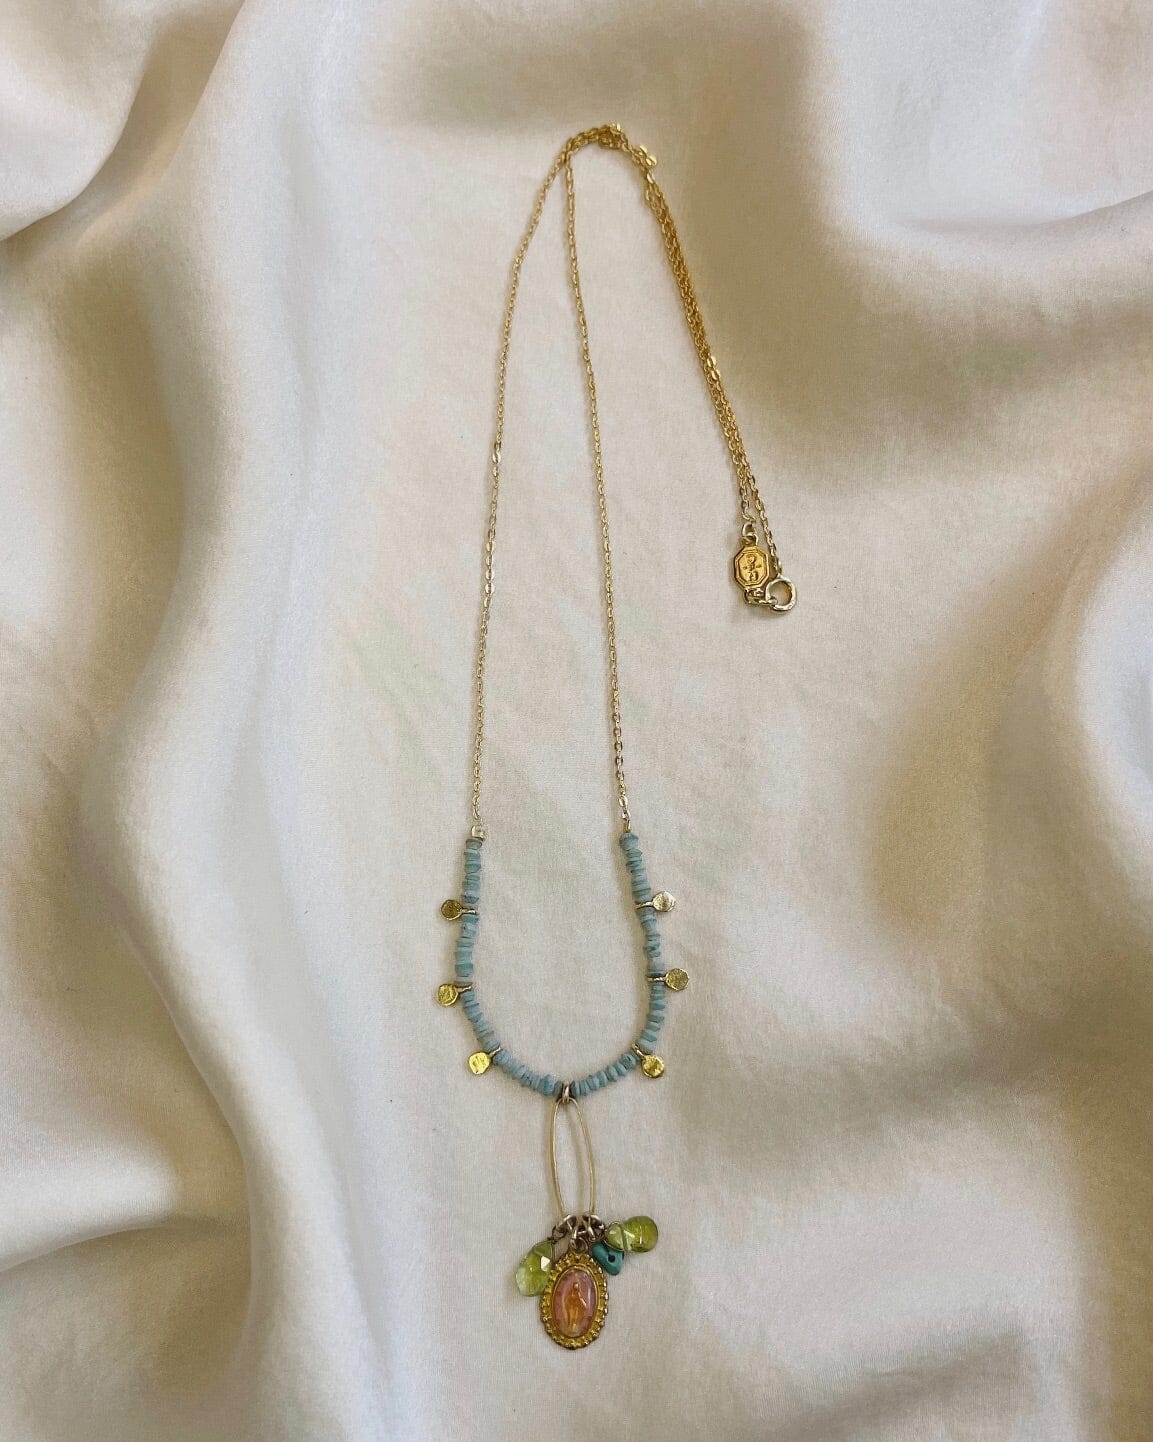 virgin mary  vermeil  turquoise  stunning  stone  simple  resin  peridot  pendant  pearls  necklace  medal  meaningful  jewelry  jewellery  gold  glamorous  gem  disk  colliers  collier  chic  charm  chain  brass  boho  bijoux  beads